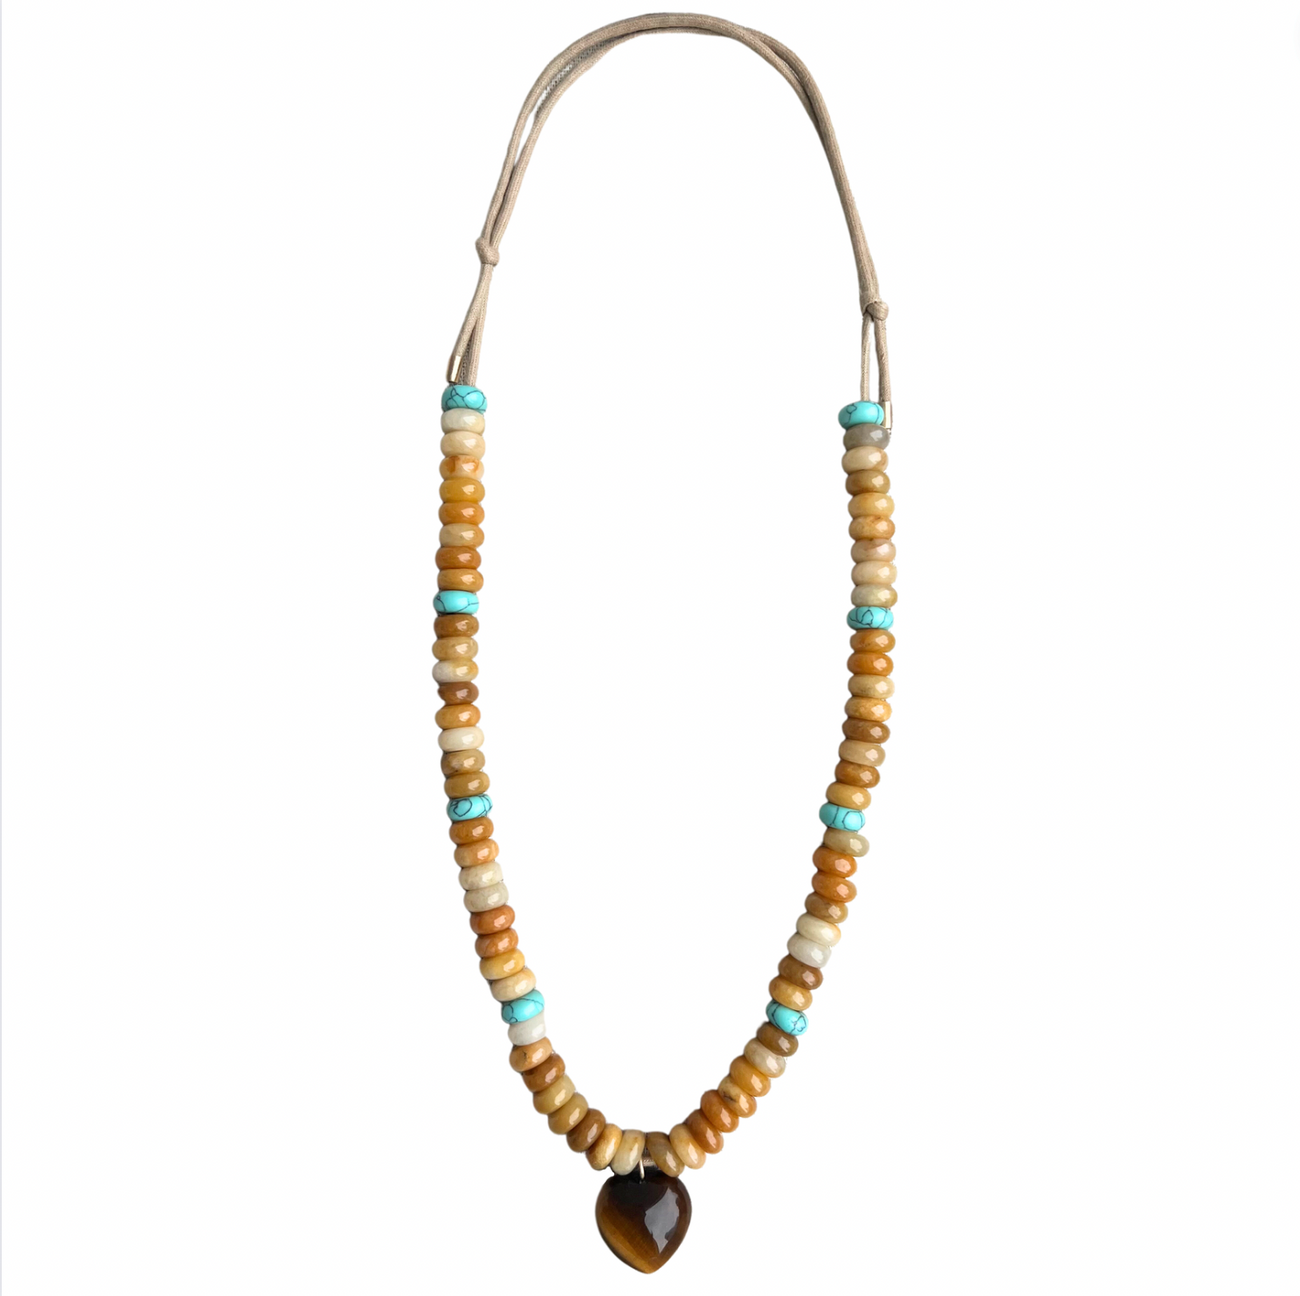 Brown and Turquoise Beaded Necklace with Puffy Heart